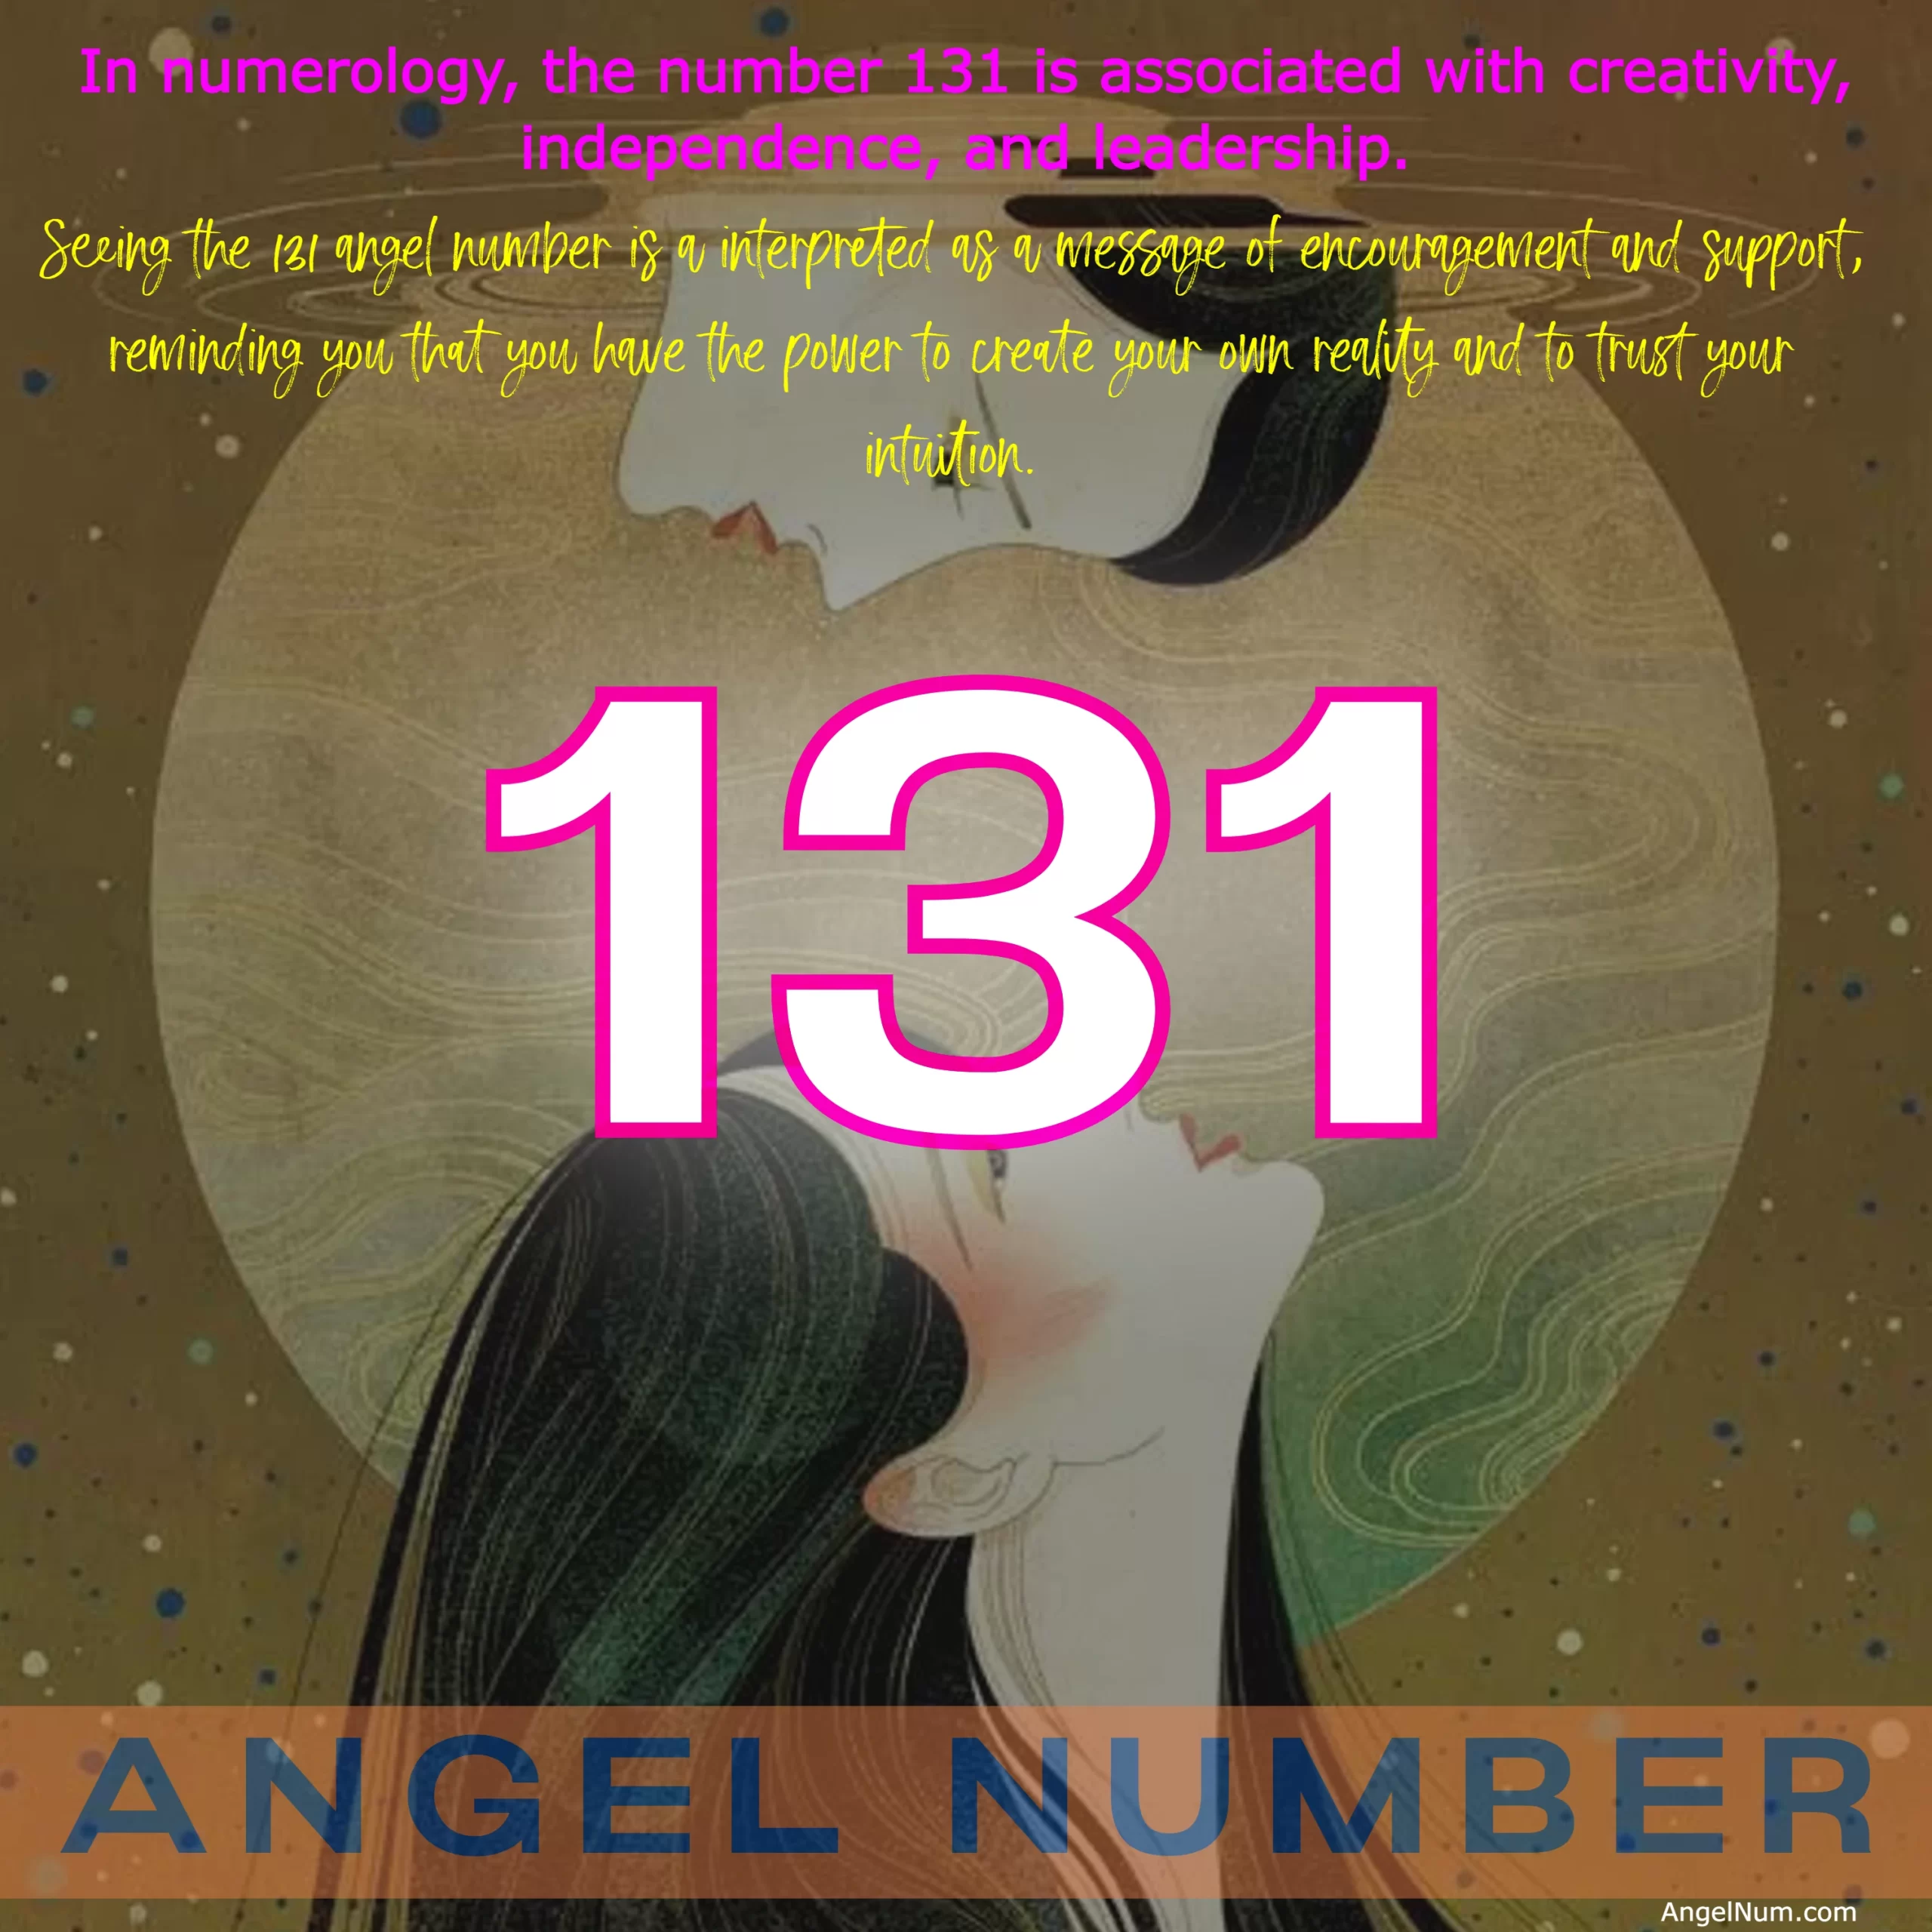 Angel Number 131: Meaning, Significance, and Symbolism